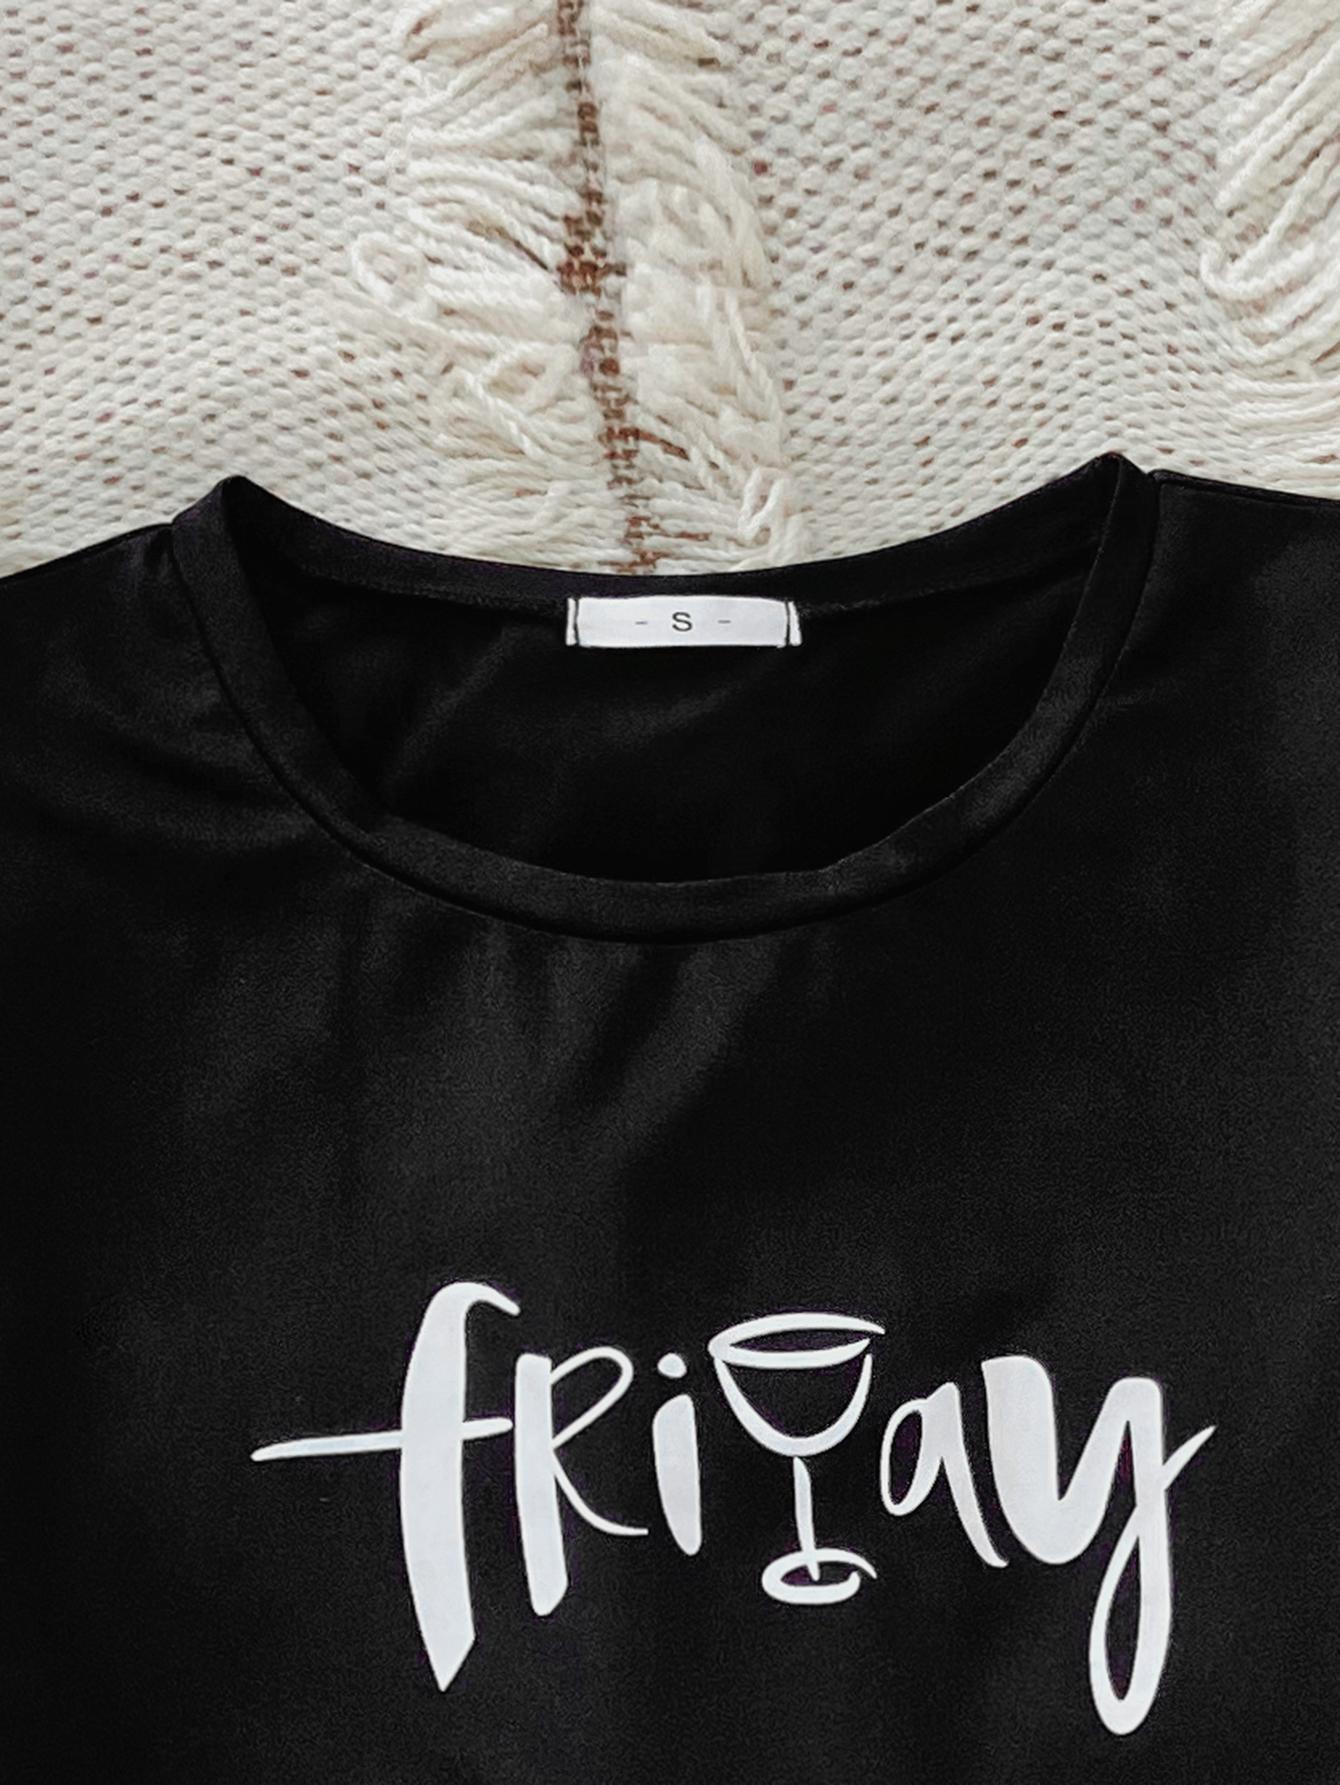 a black shirt with the word friday written on it